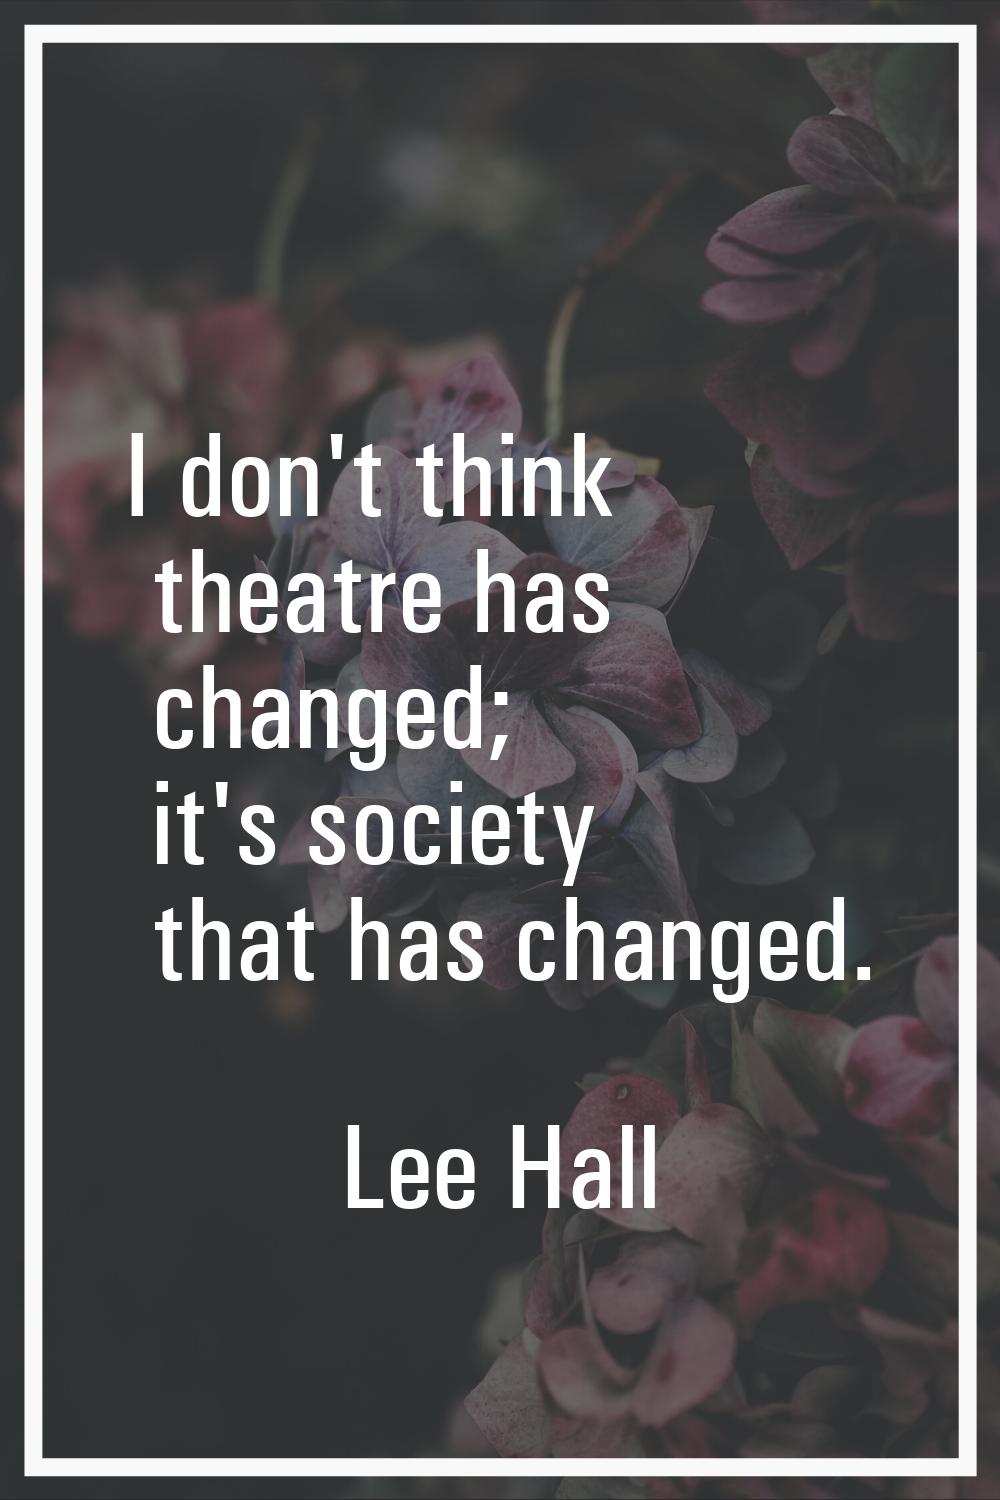 I don't think theatre has changed; it's society that has changed.